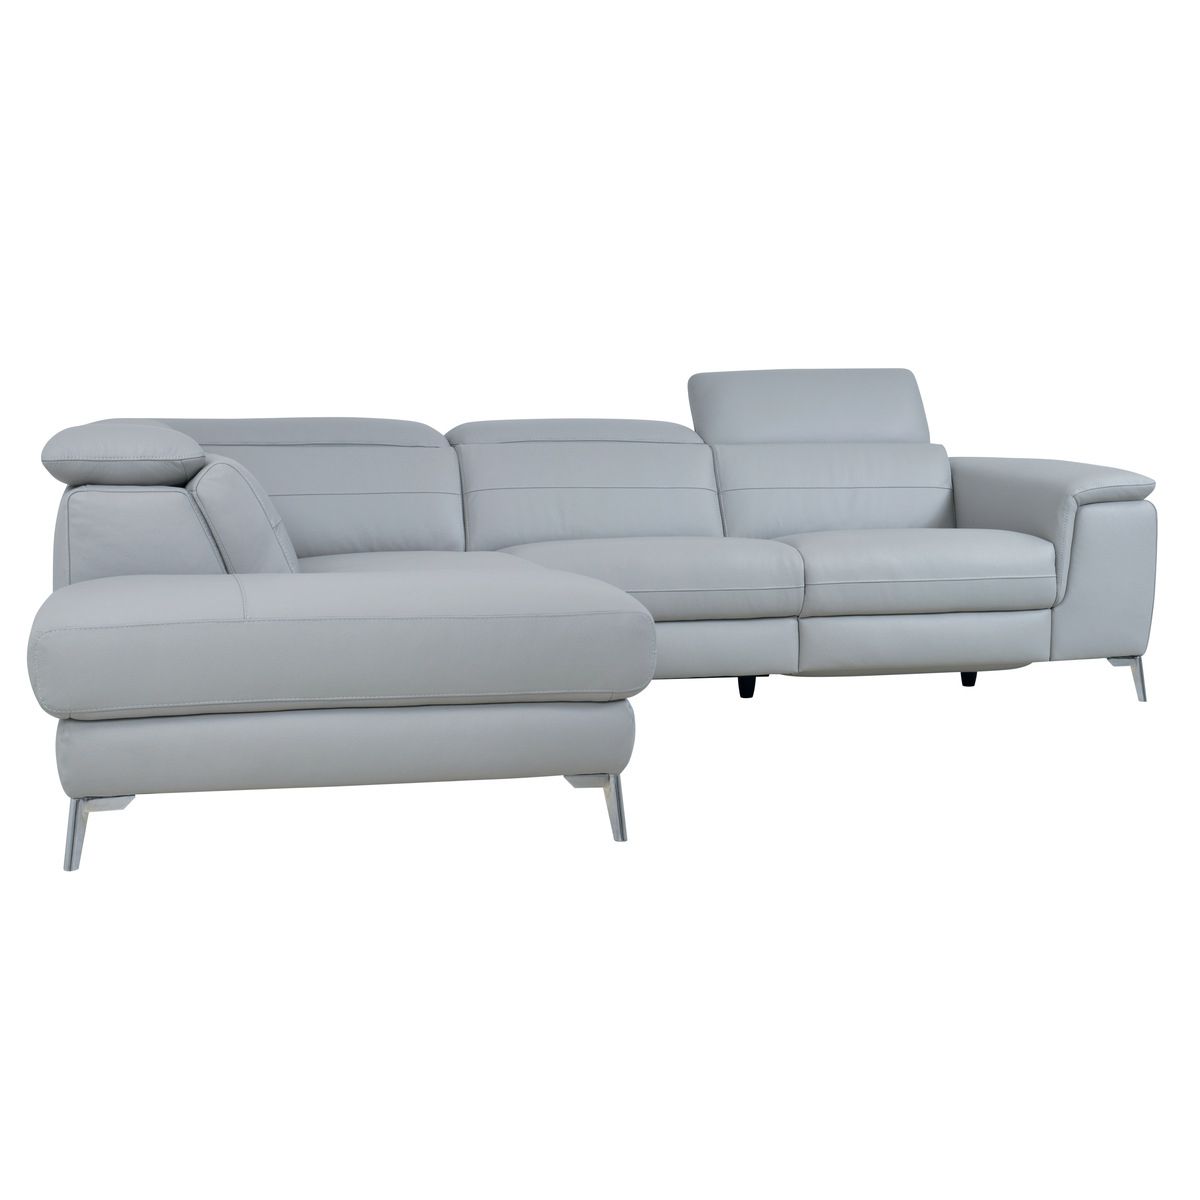 8256gylss 2 Piece Sectional With Left Chaise, Light Grey With 2pc Crowningshield Contemporary Chaise Sofas Light Gray (View 10 of 15)